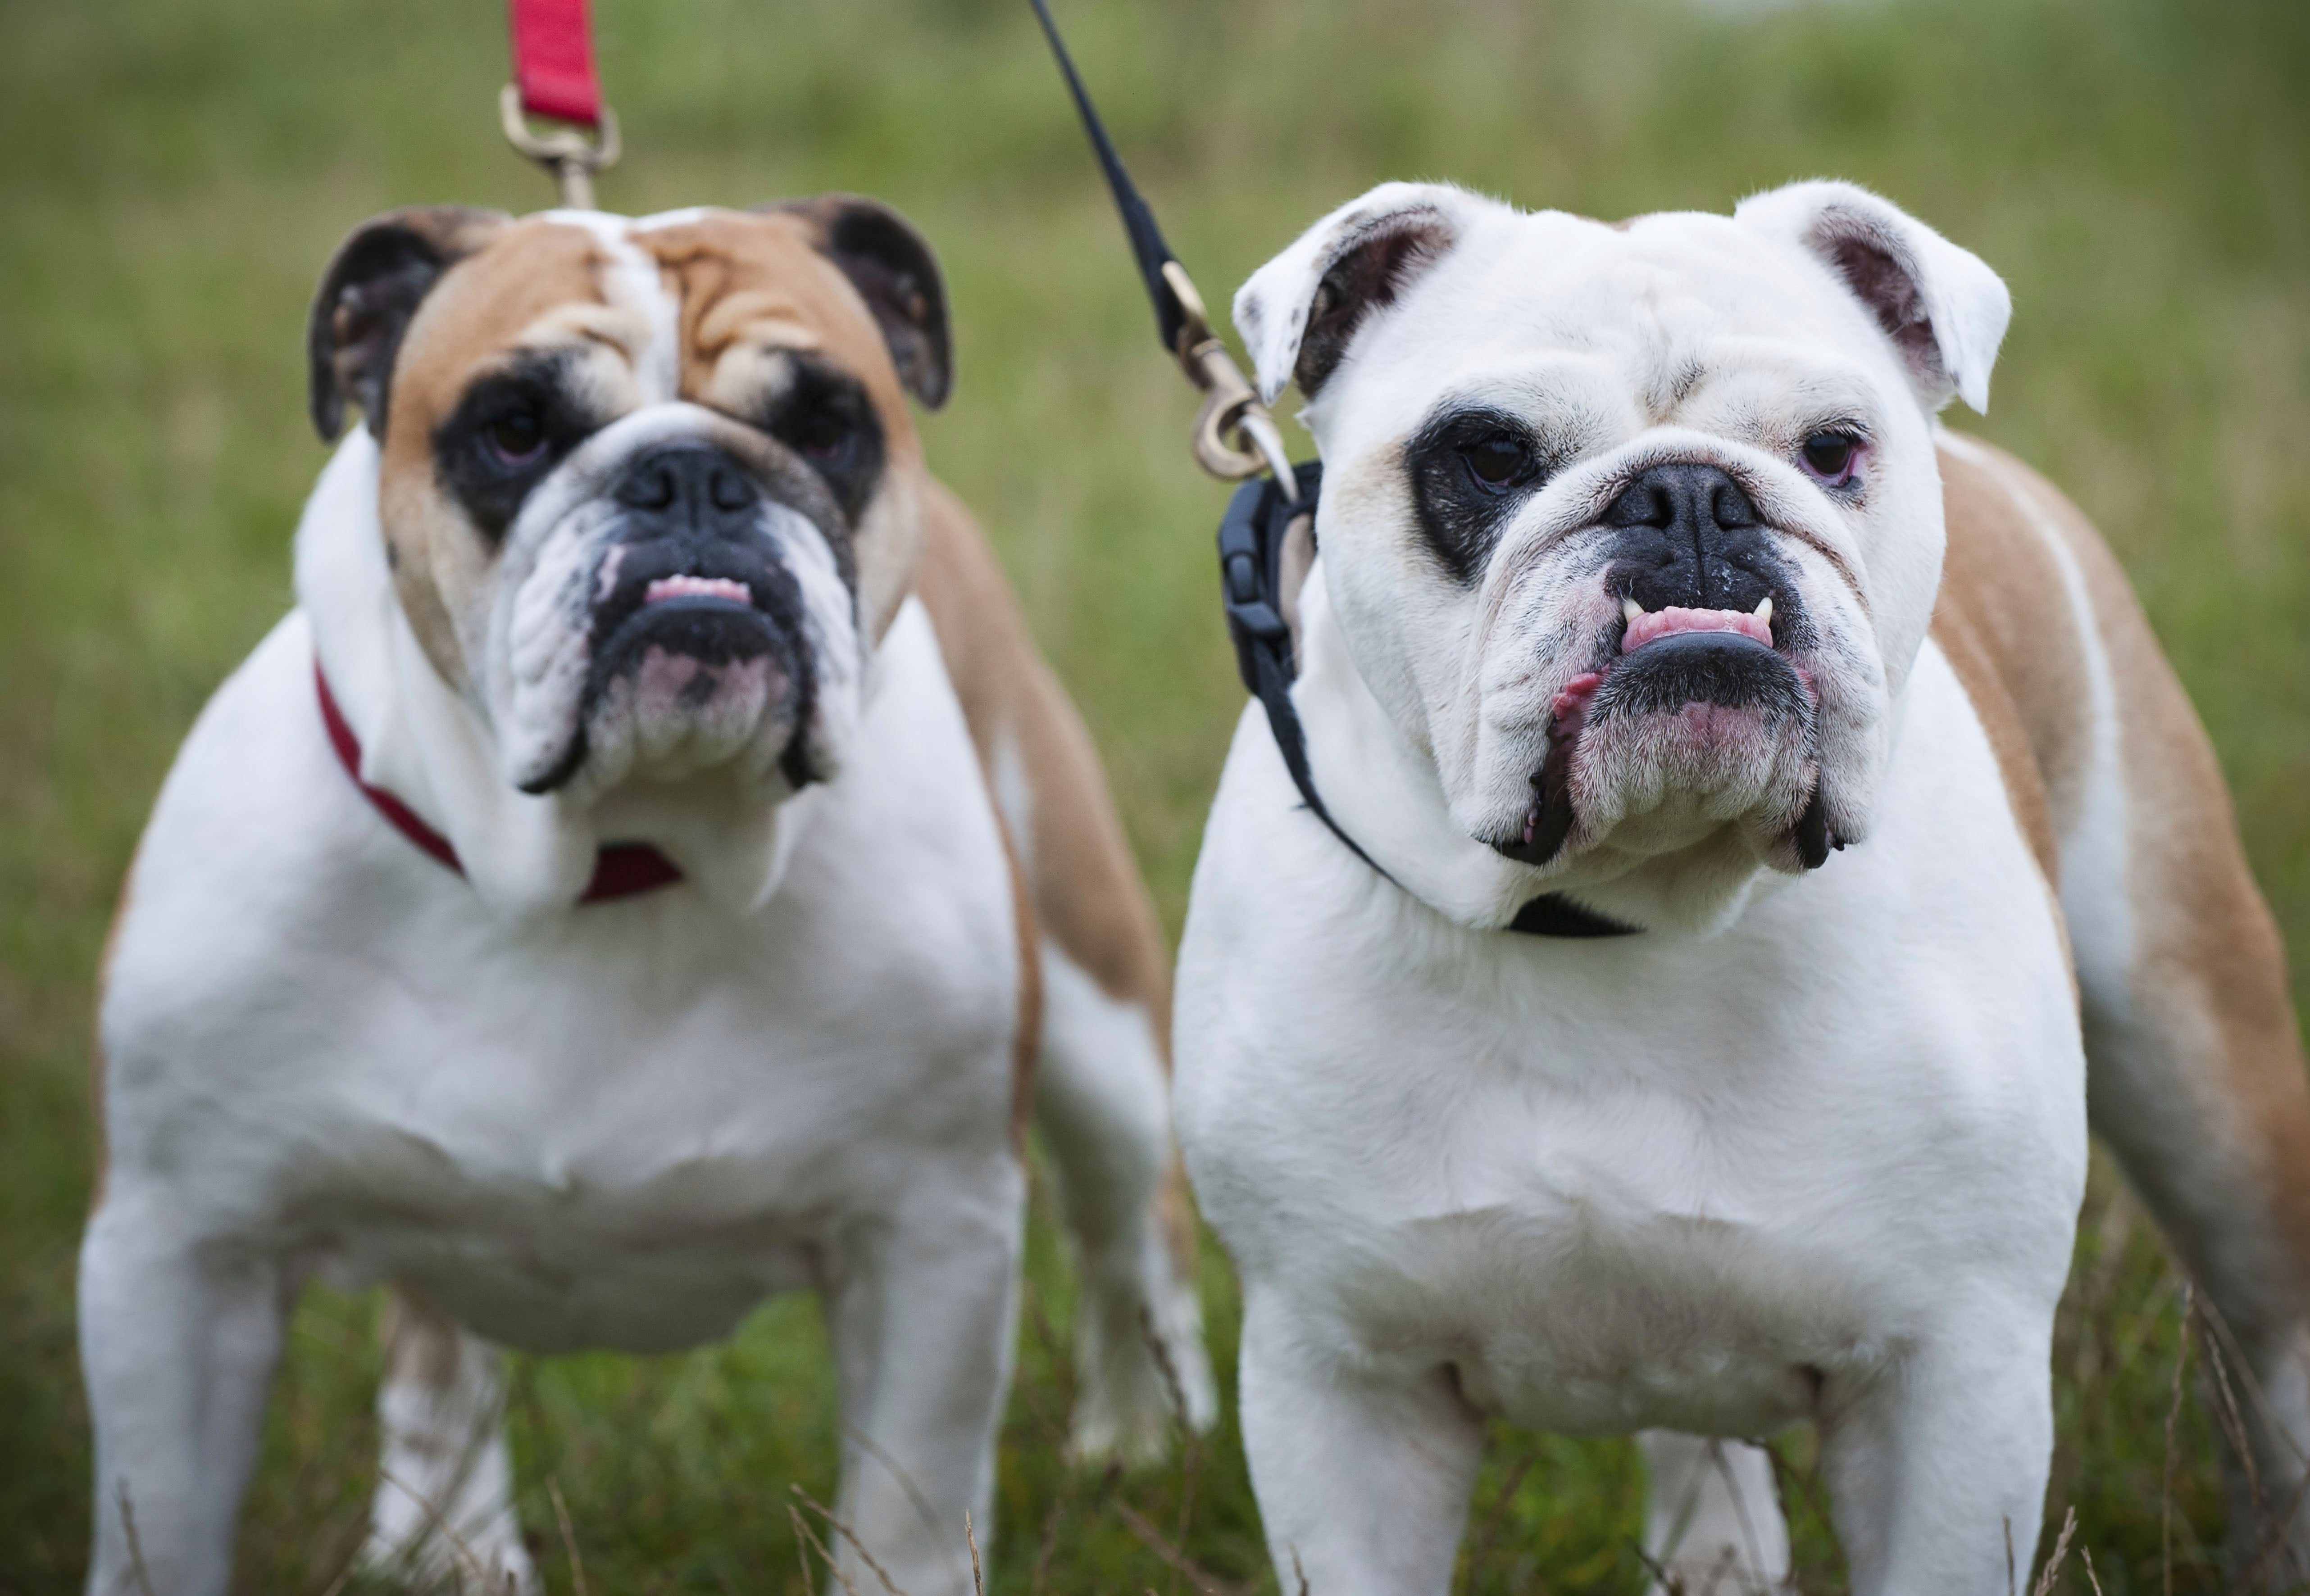 Two English bulldogs as the breed of dog most likely to be stolen are revealed